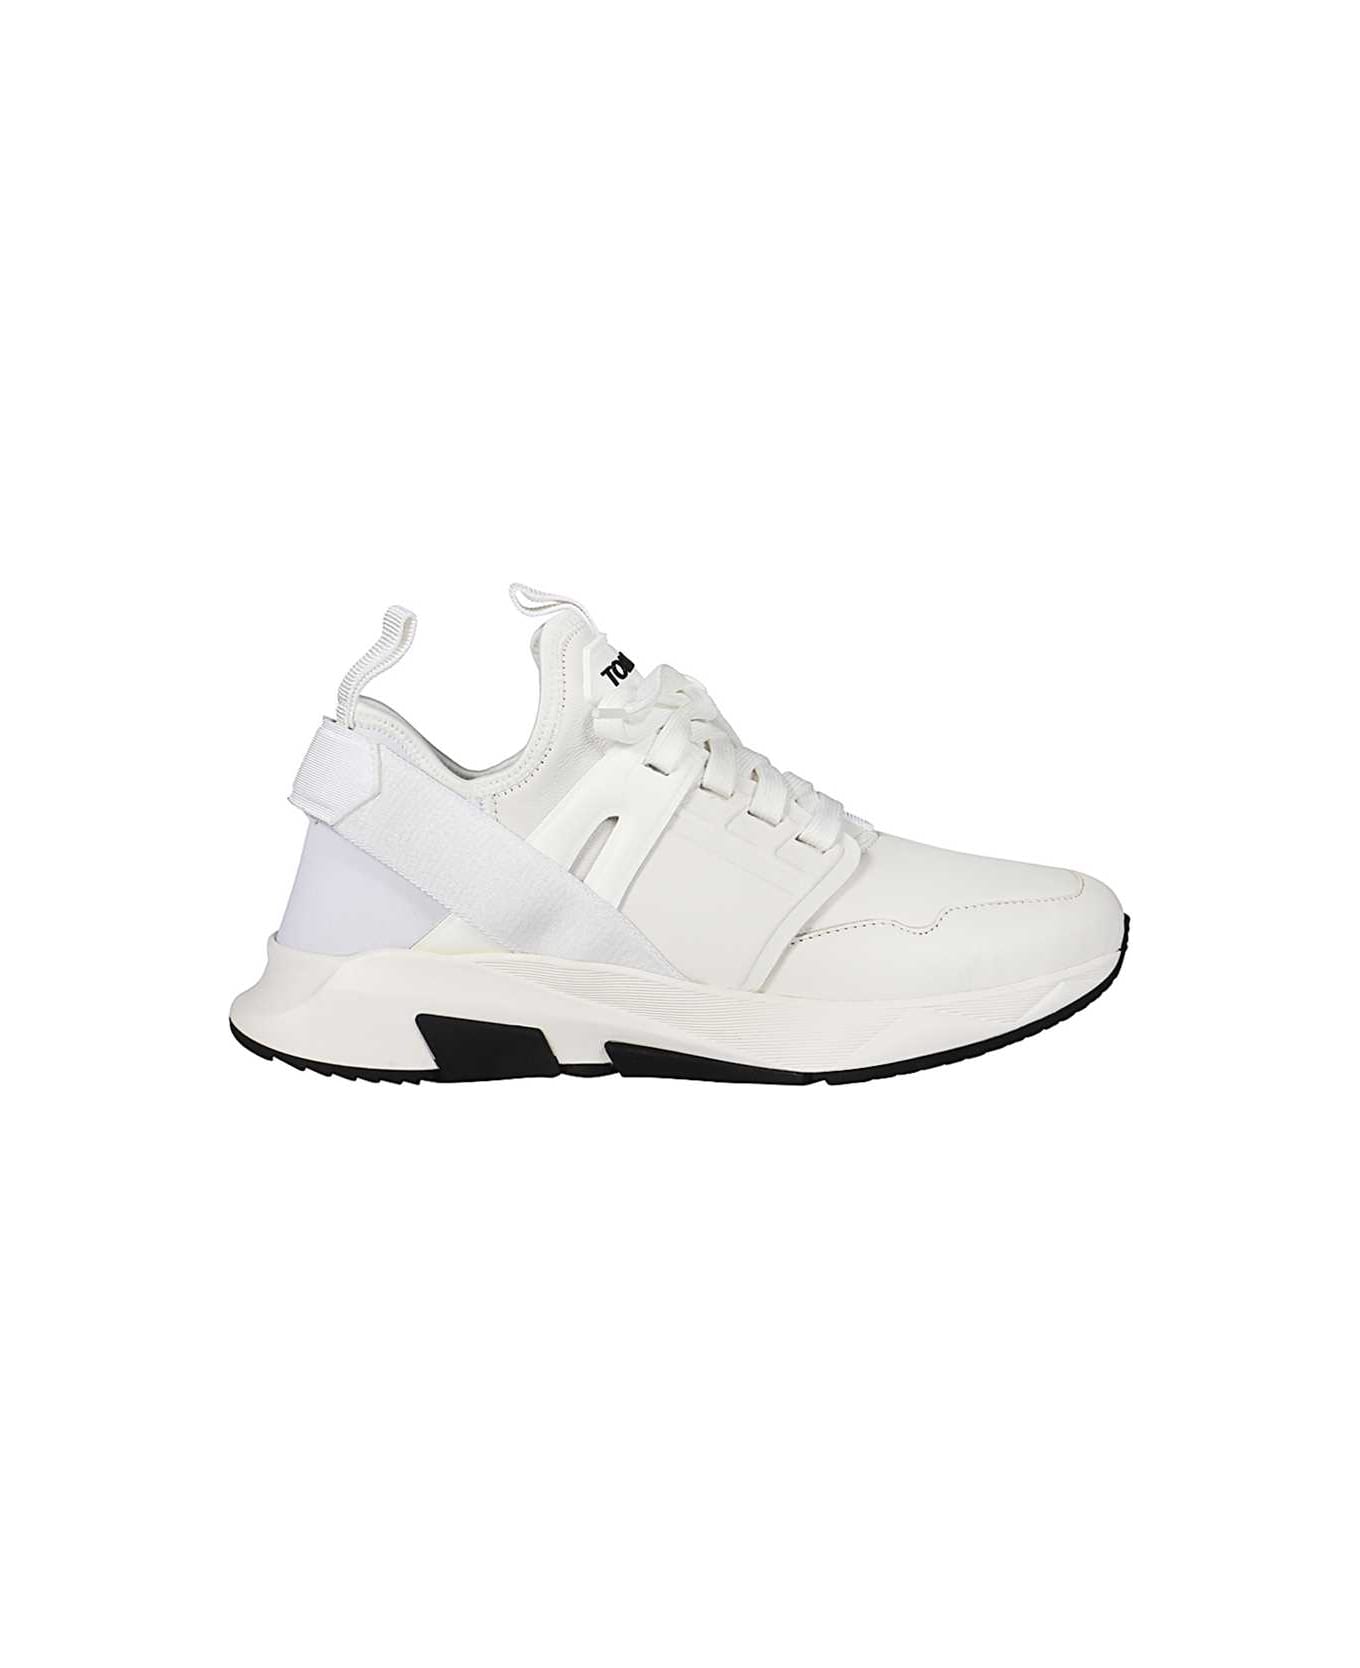 Tom Ford Jago Low-top Sneakers - White